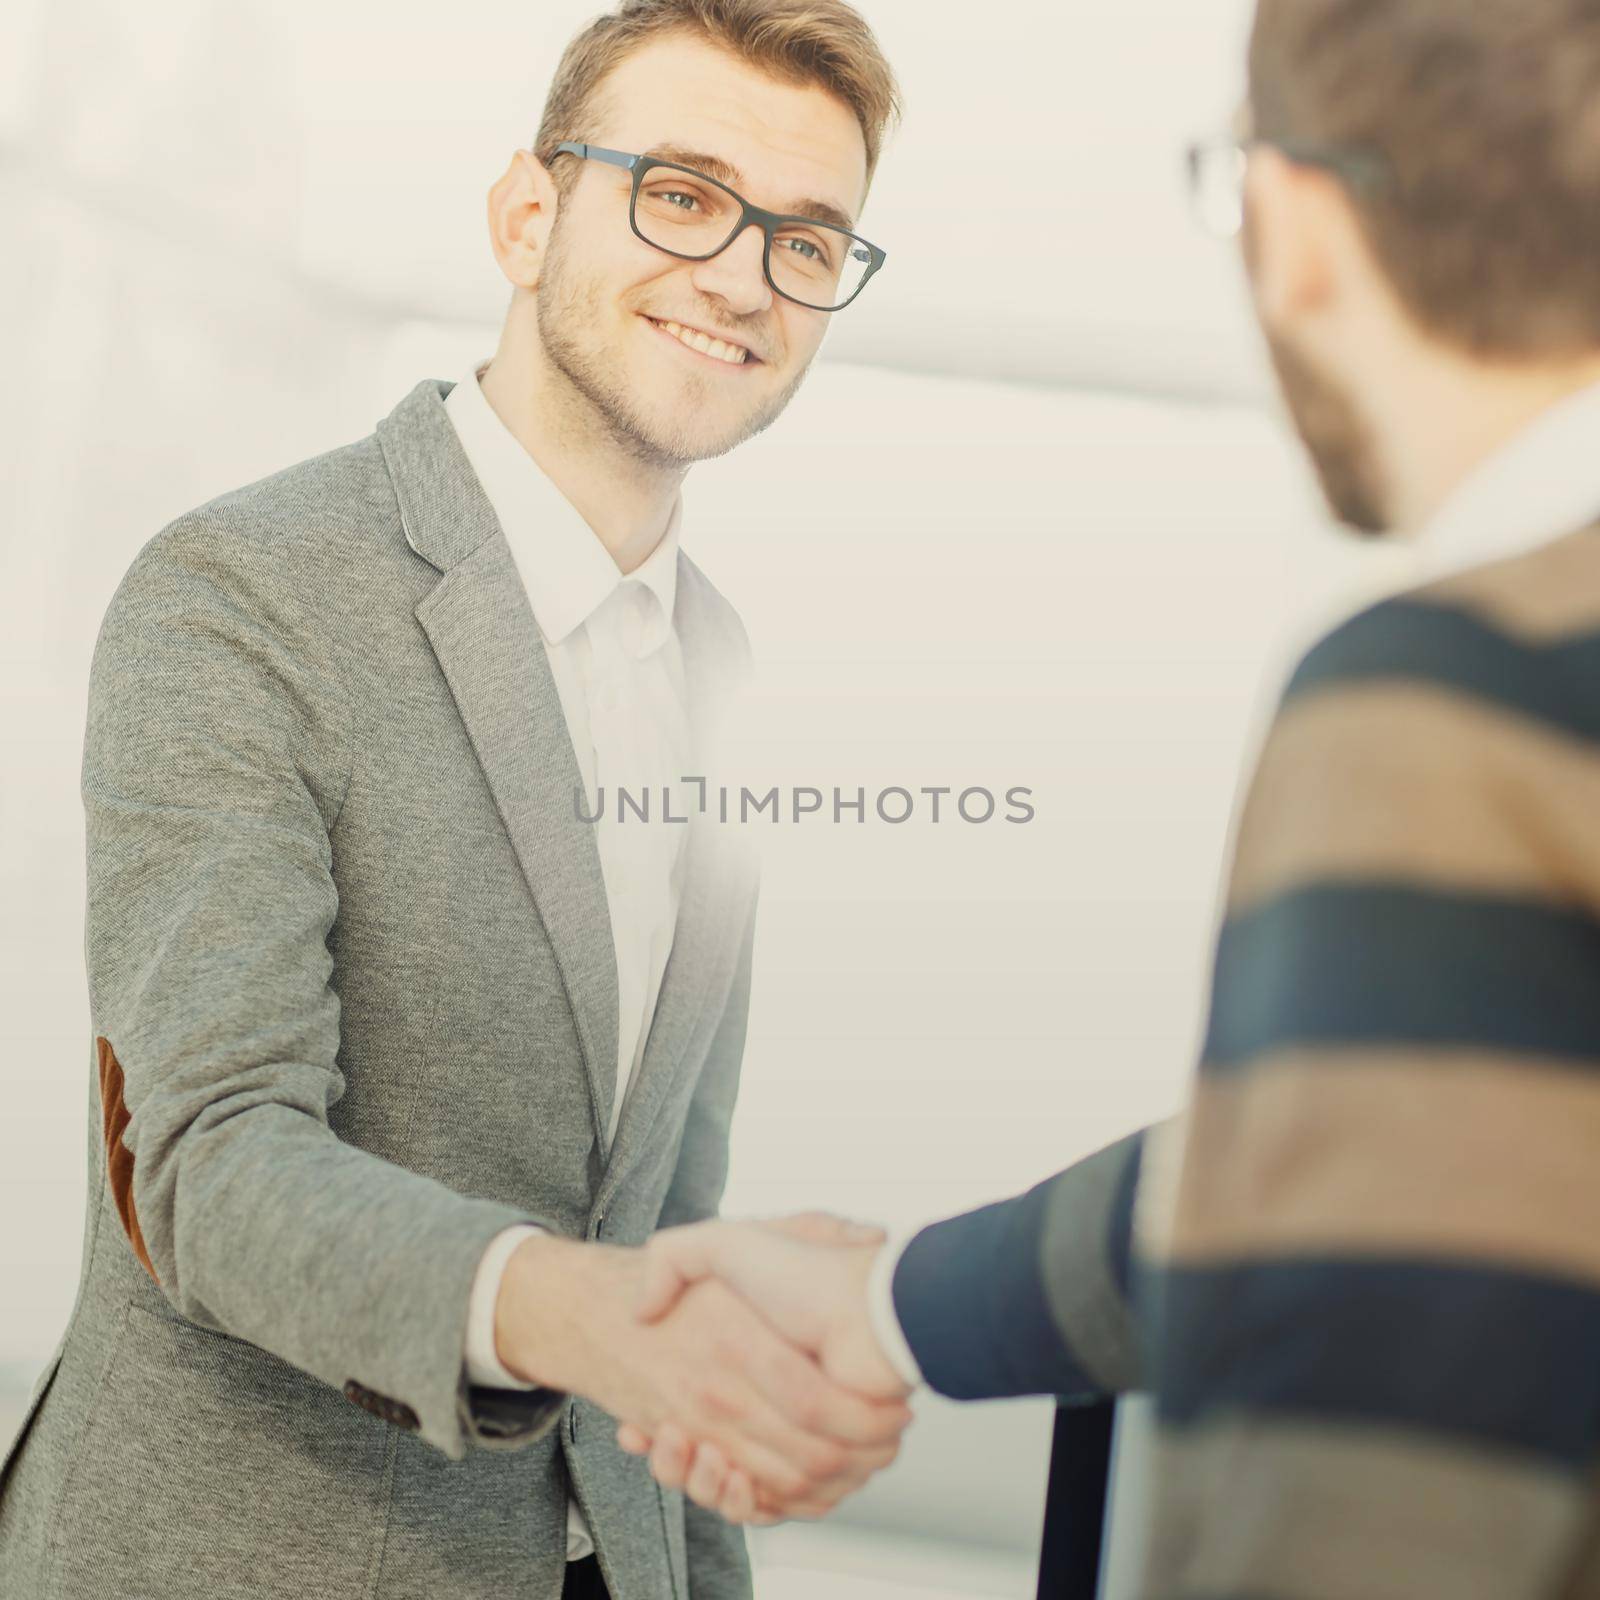 concept of a reliable partnership - the lawyer and the client, shake hands after signing the financing contract by SmartPhotoLab